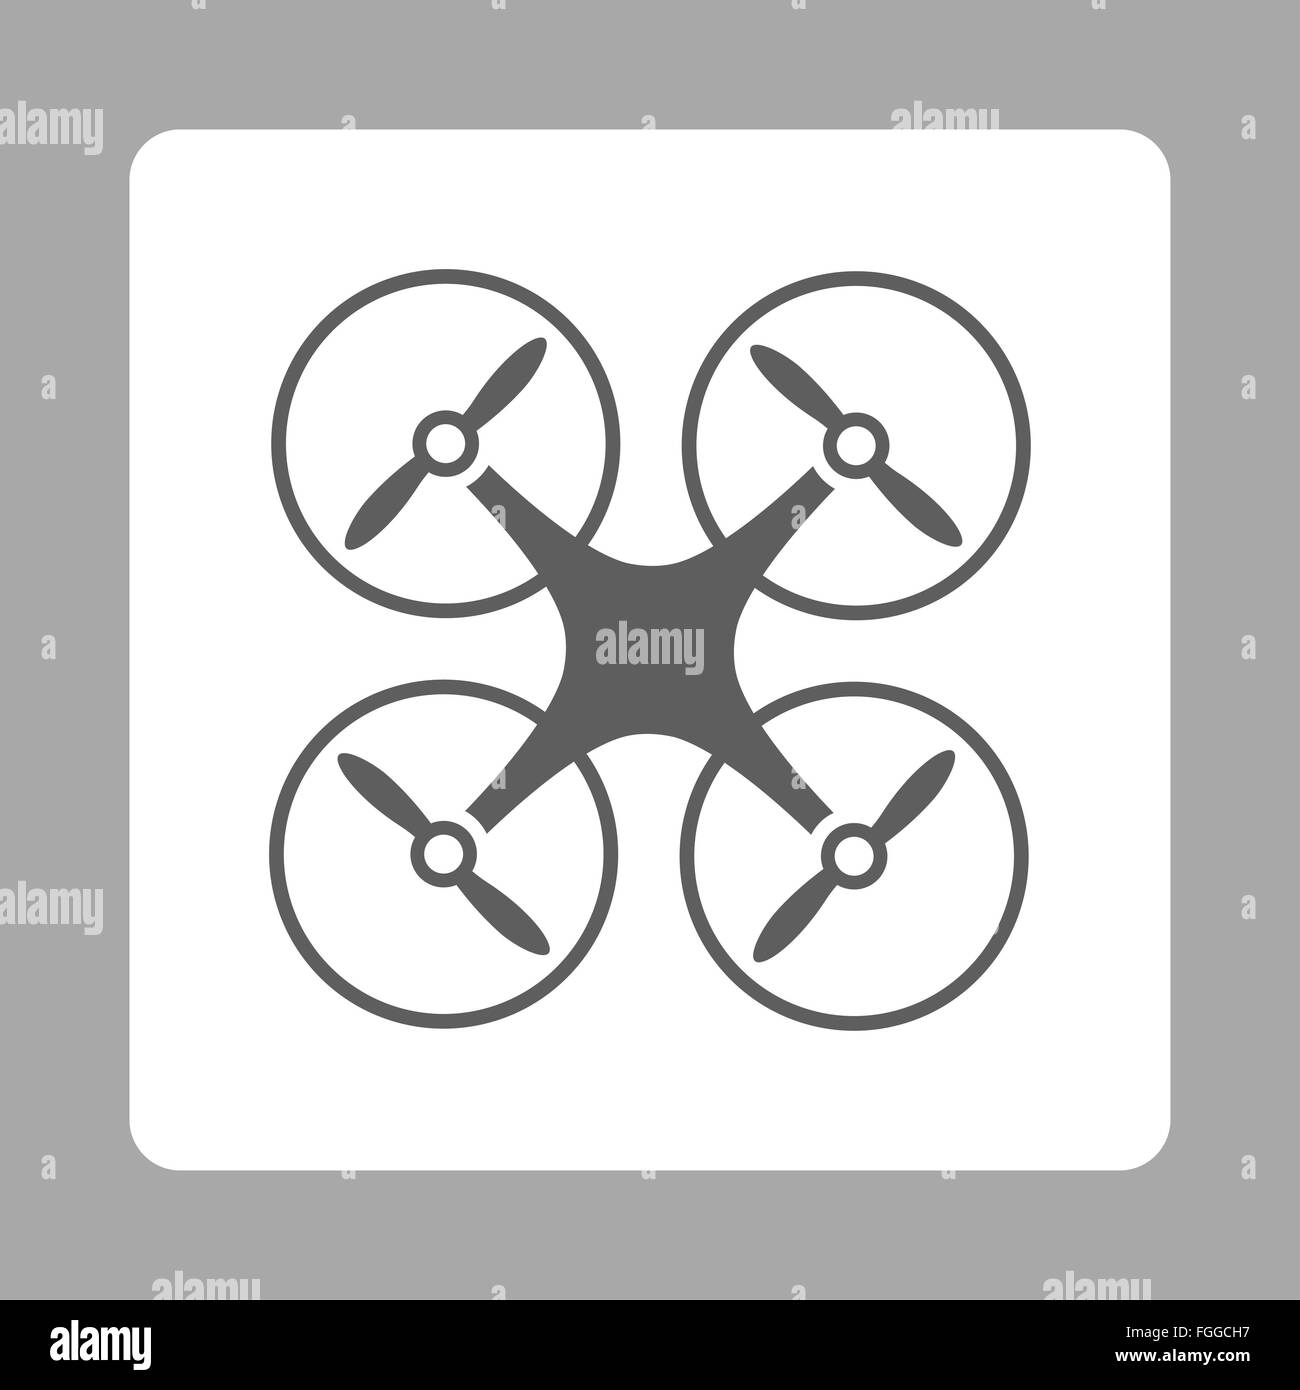 Copter icon Stock Photo